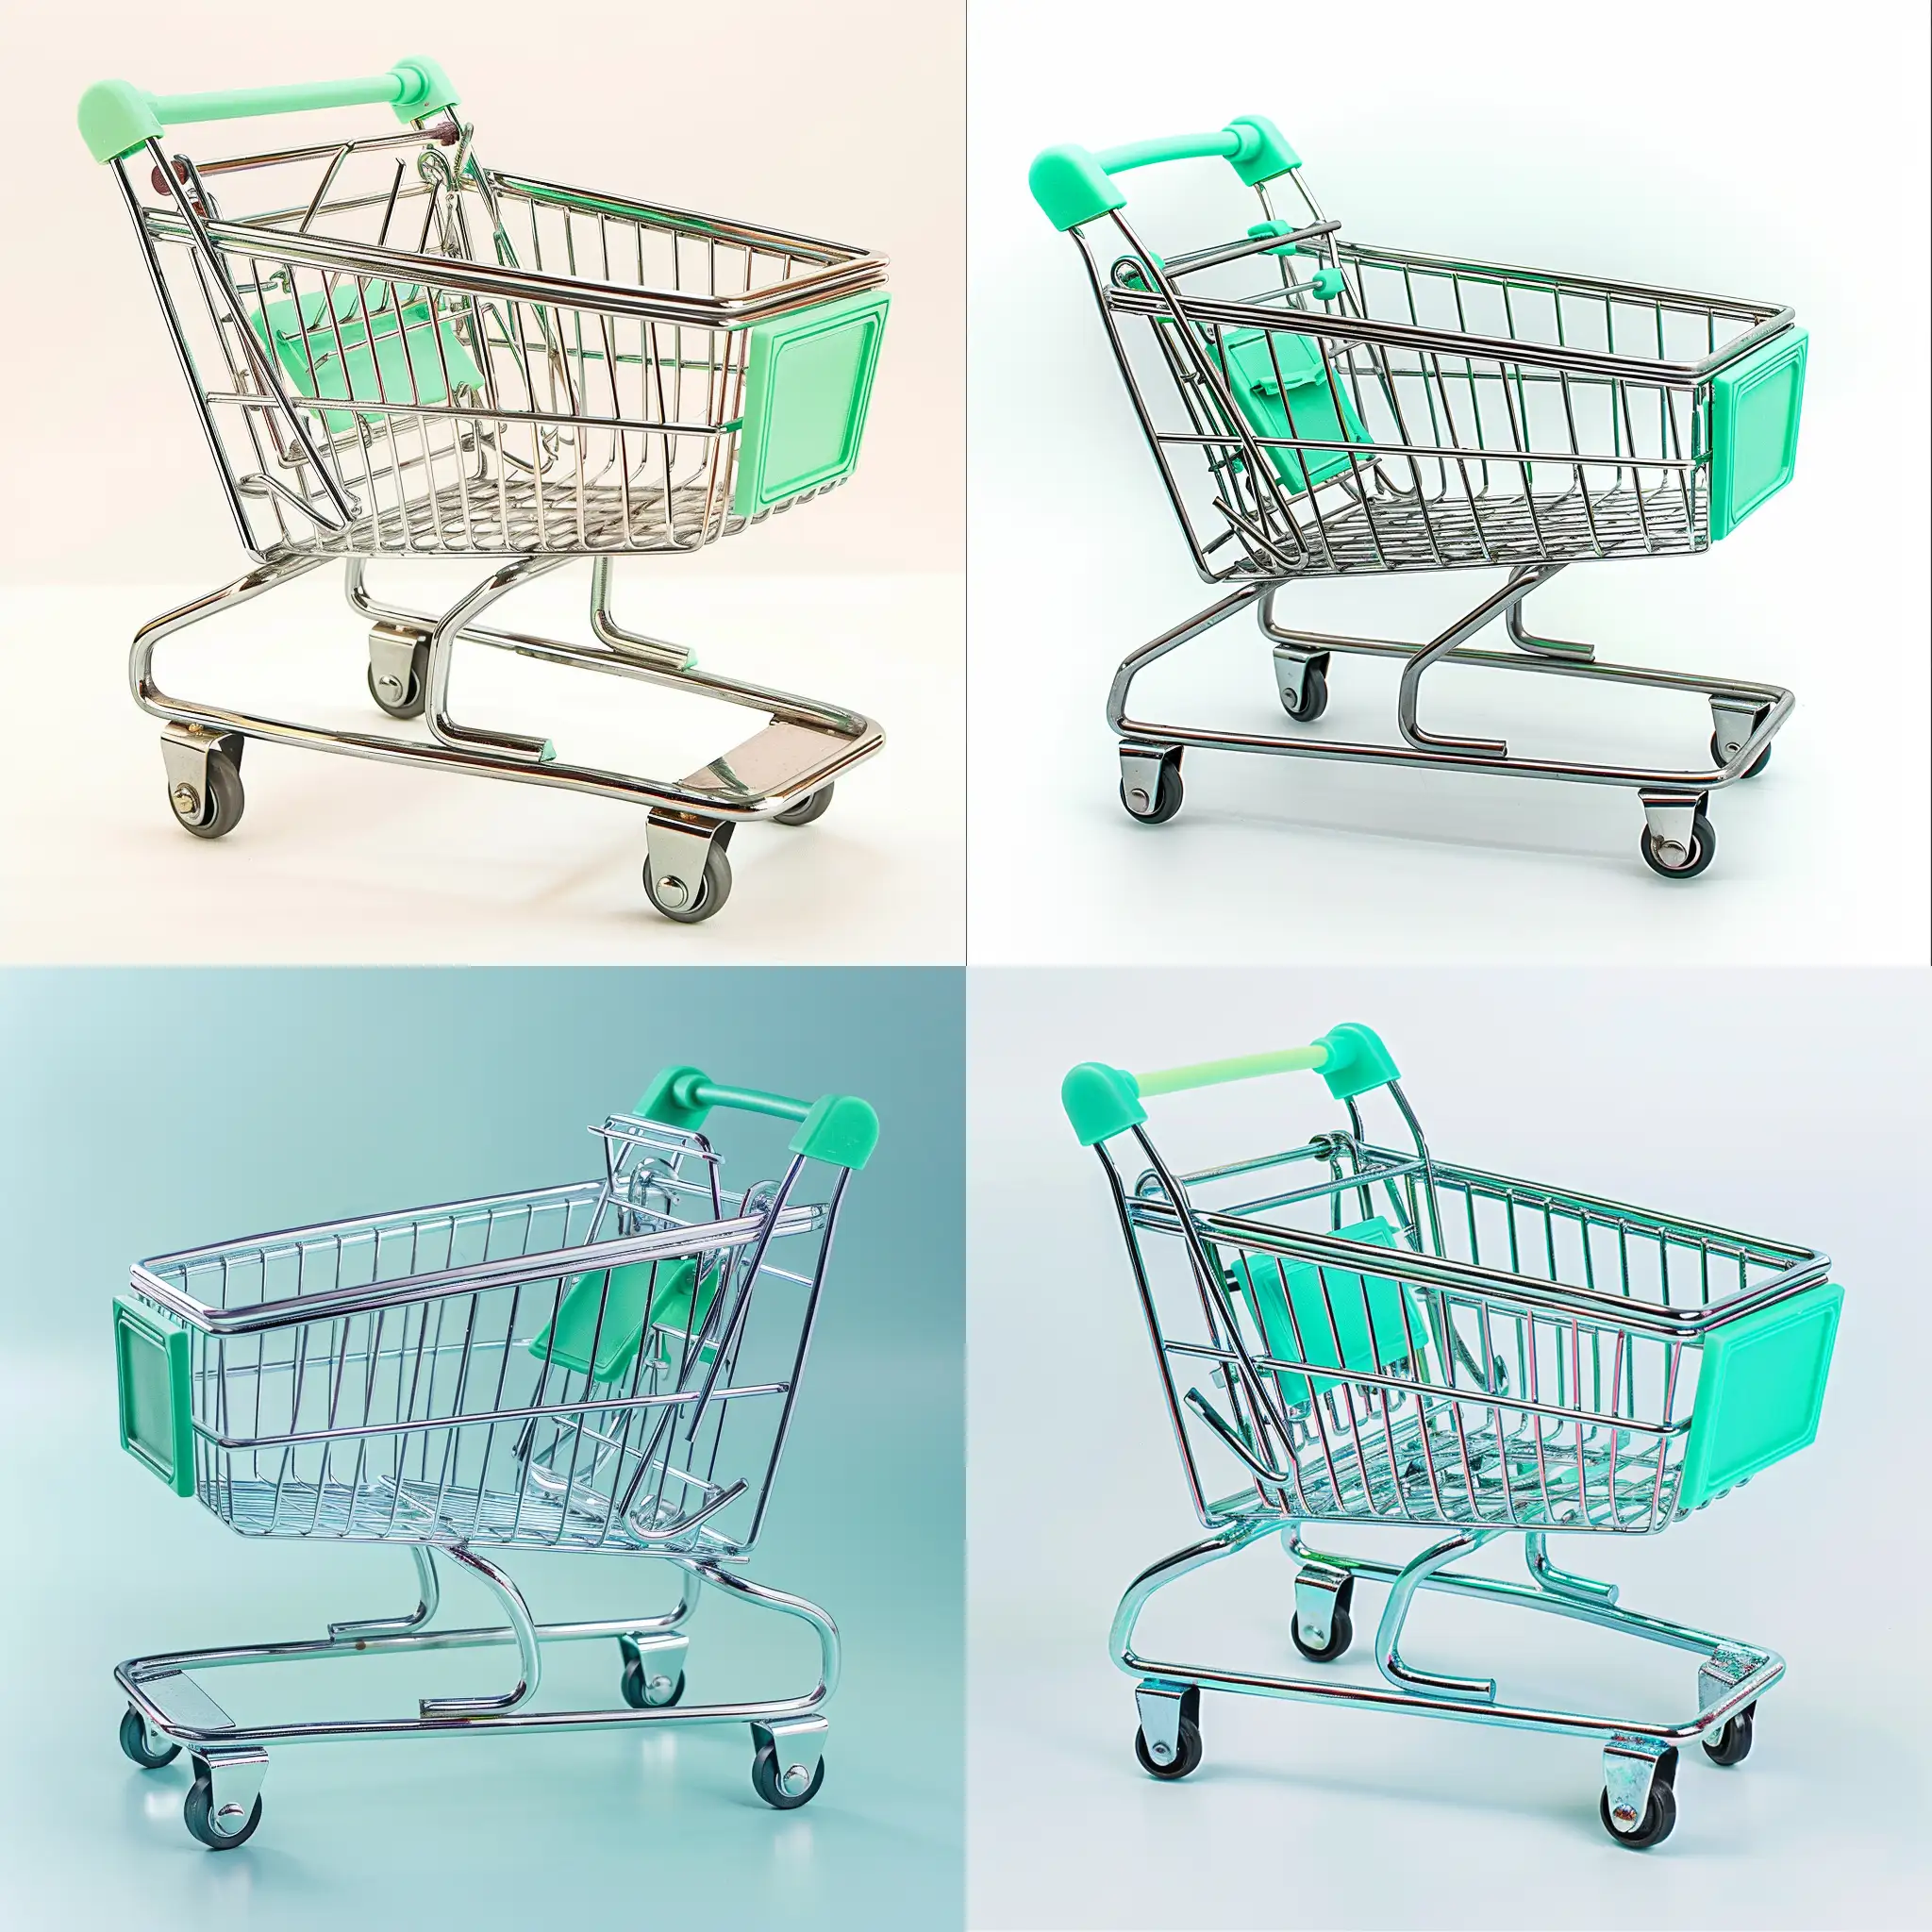 metal shopping cart, mint green accents colour c8d5d0, clear background
